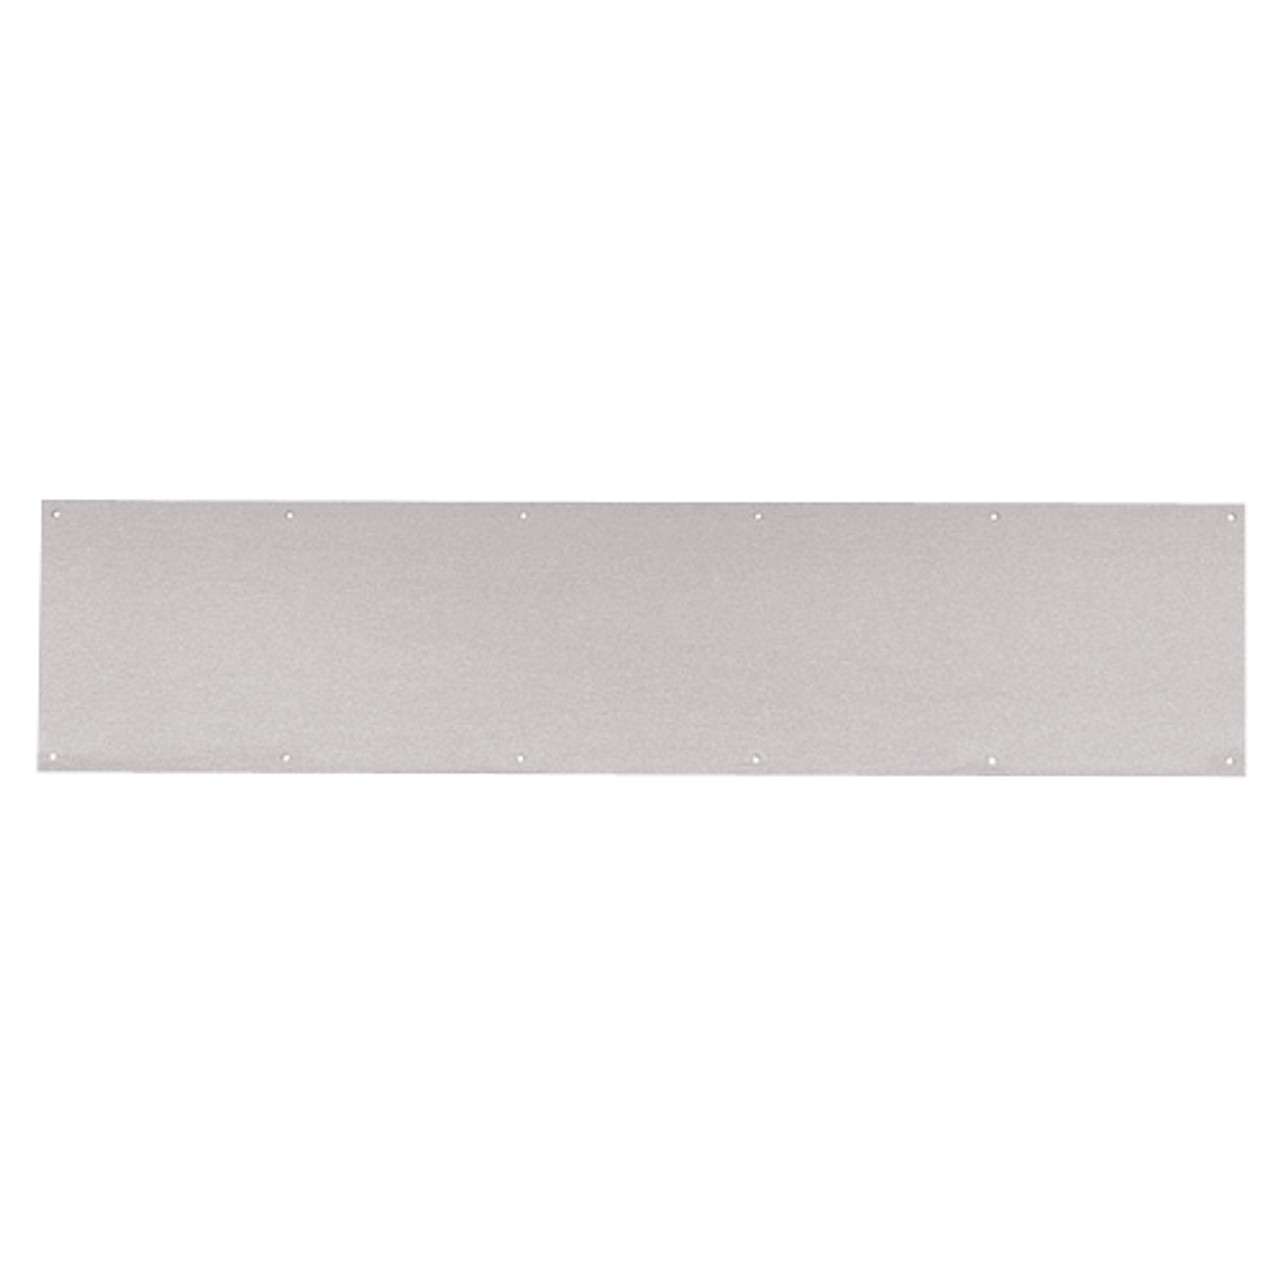 8400-US32D-8x33-B-CS Ives 8400 Series Protection Plate in Satin Stainless Steel